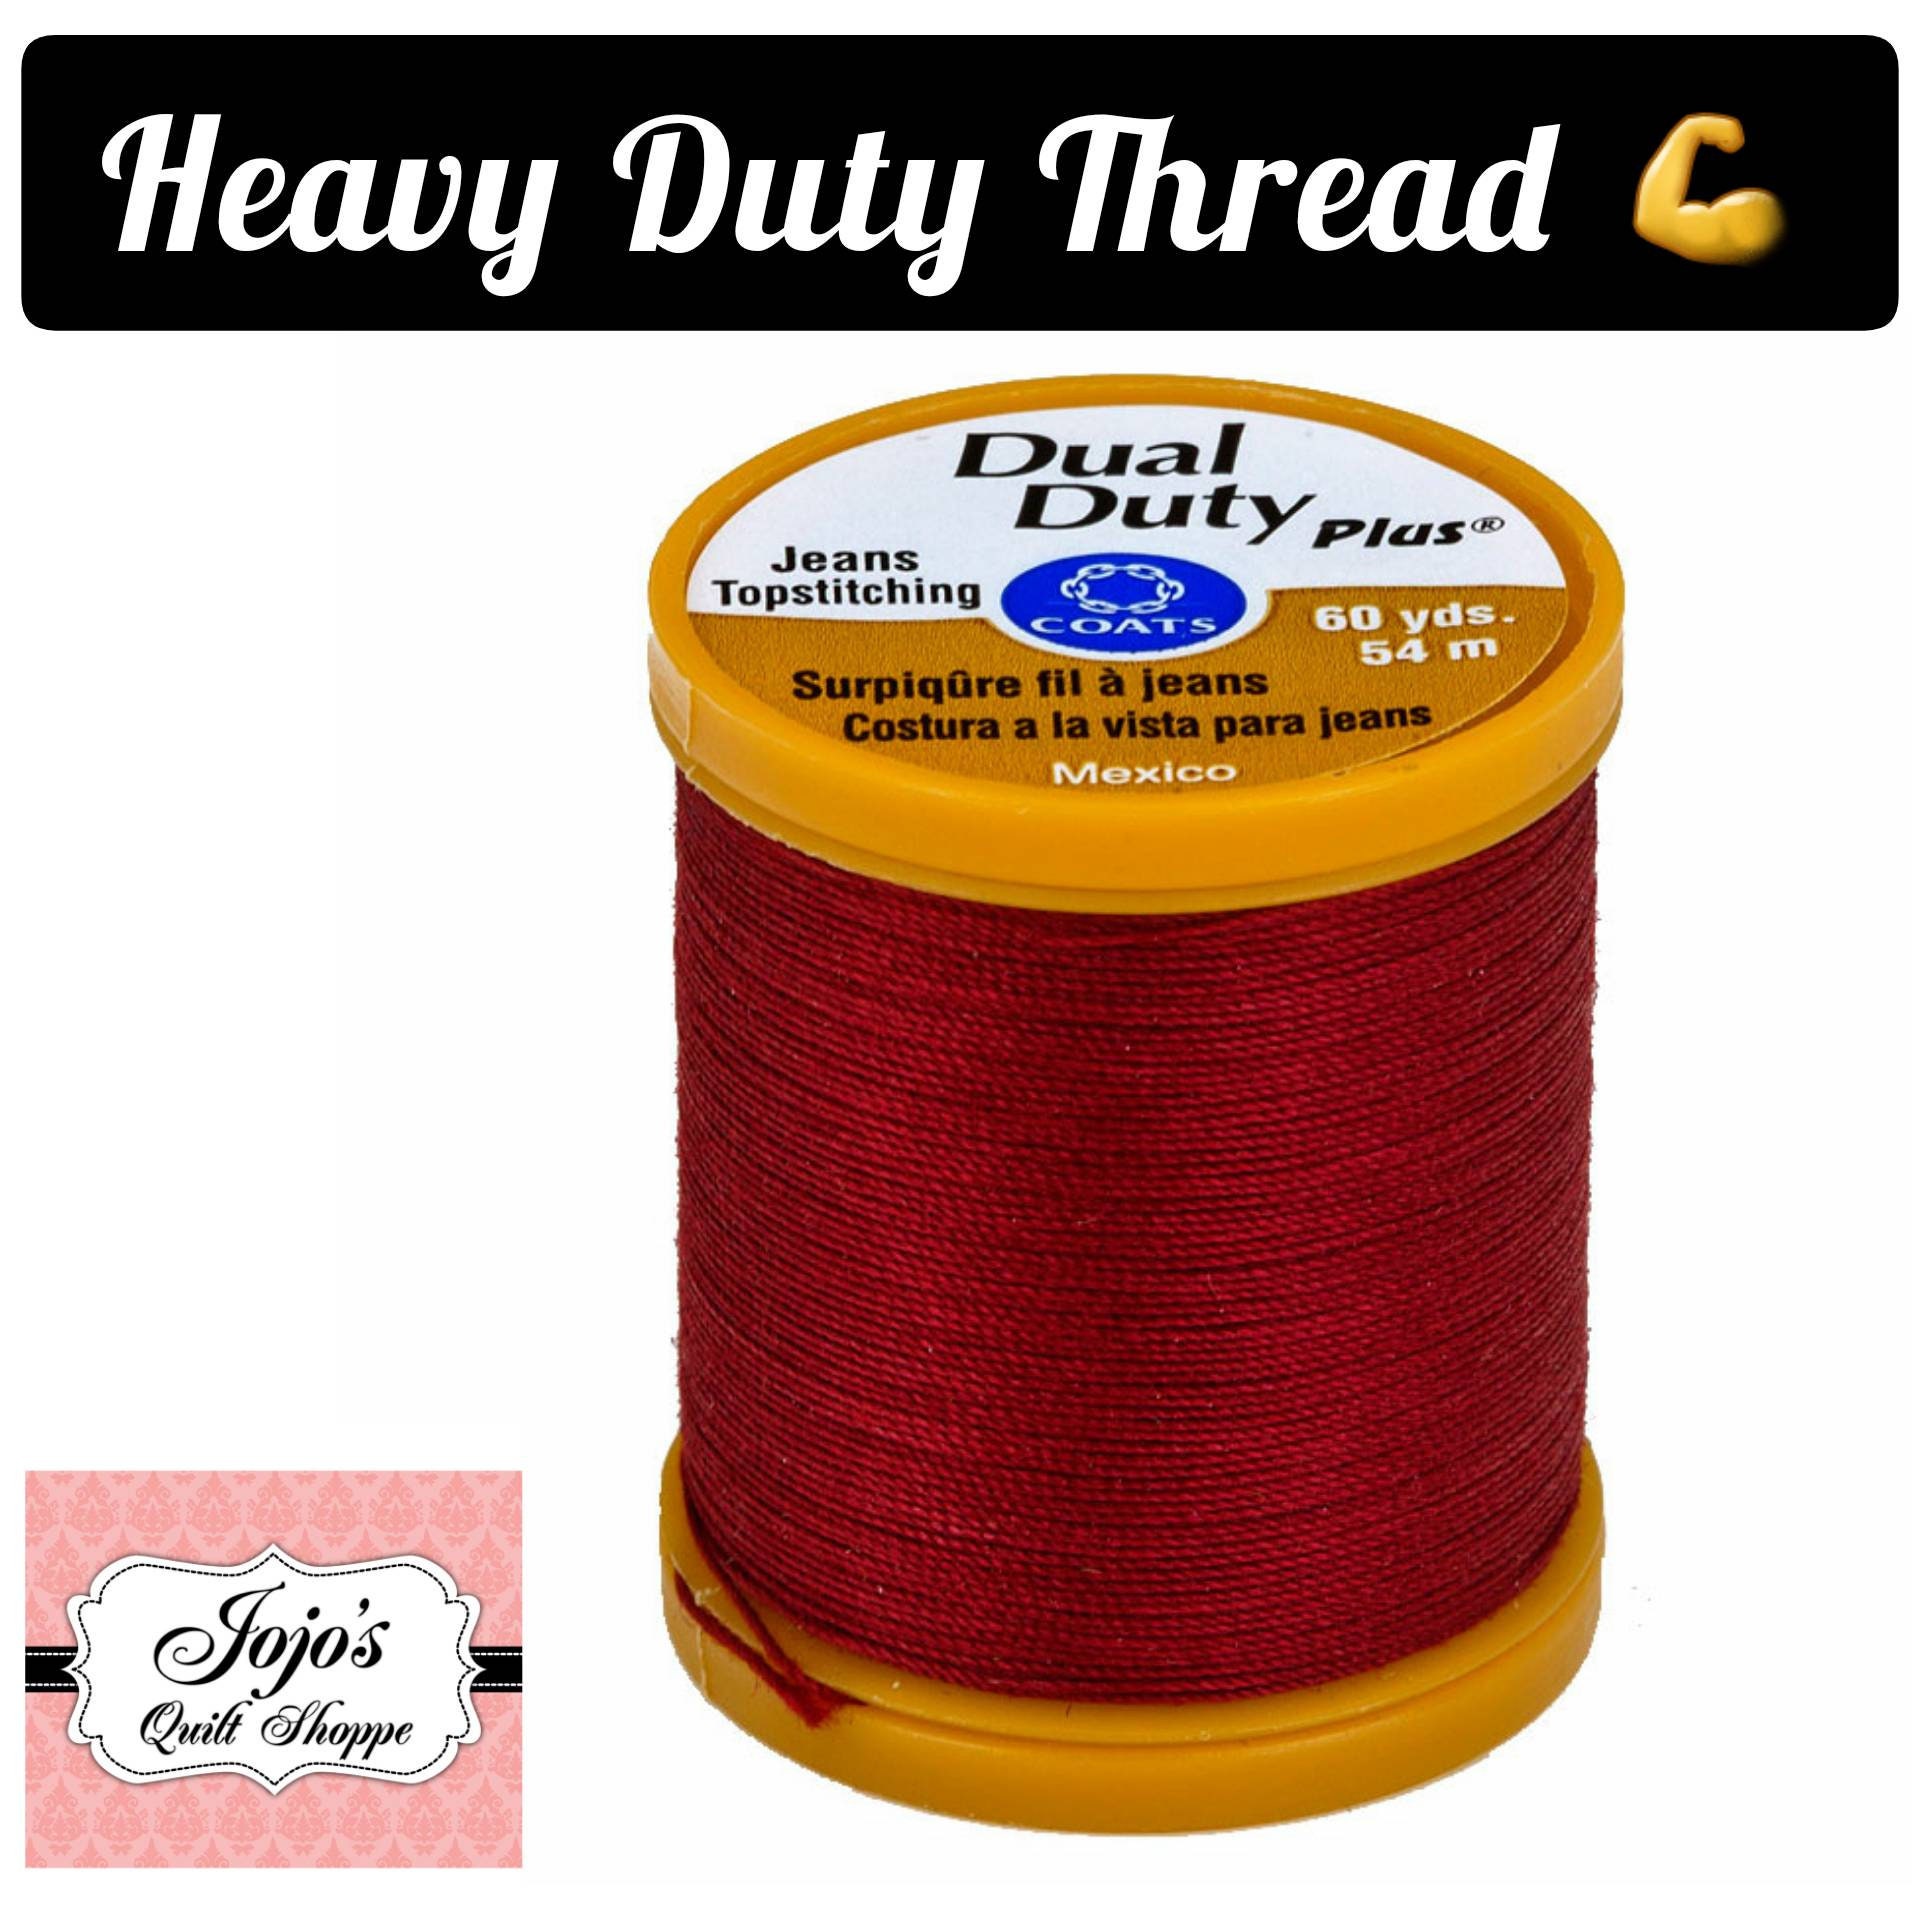 Coats and Clark Sewing Thread bayberry Red XP Heavy/dual Duty Plus Jean &  Topstitchingcotton/polythread 60 Yards, 54 Meters S977 2820 